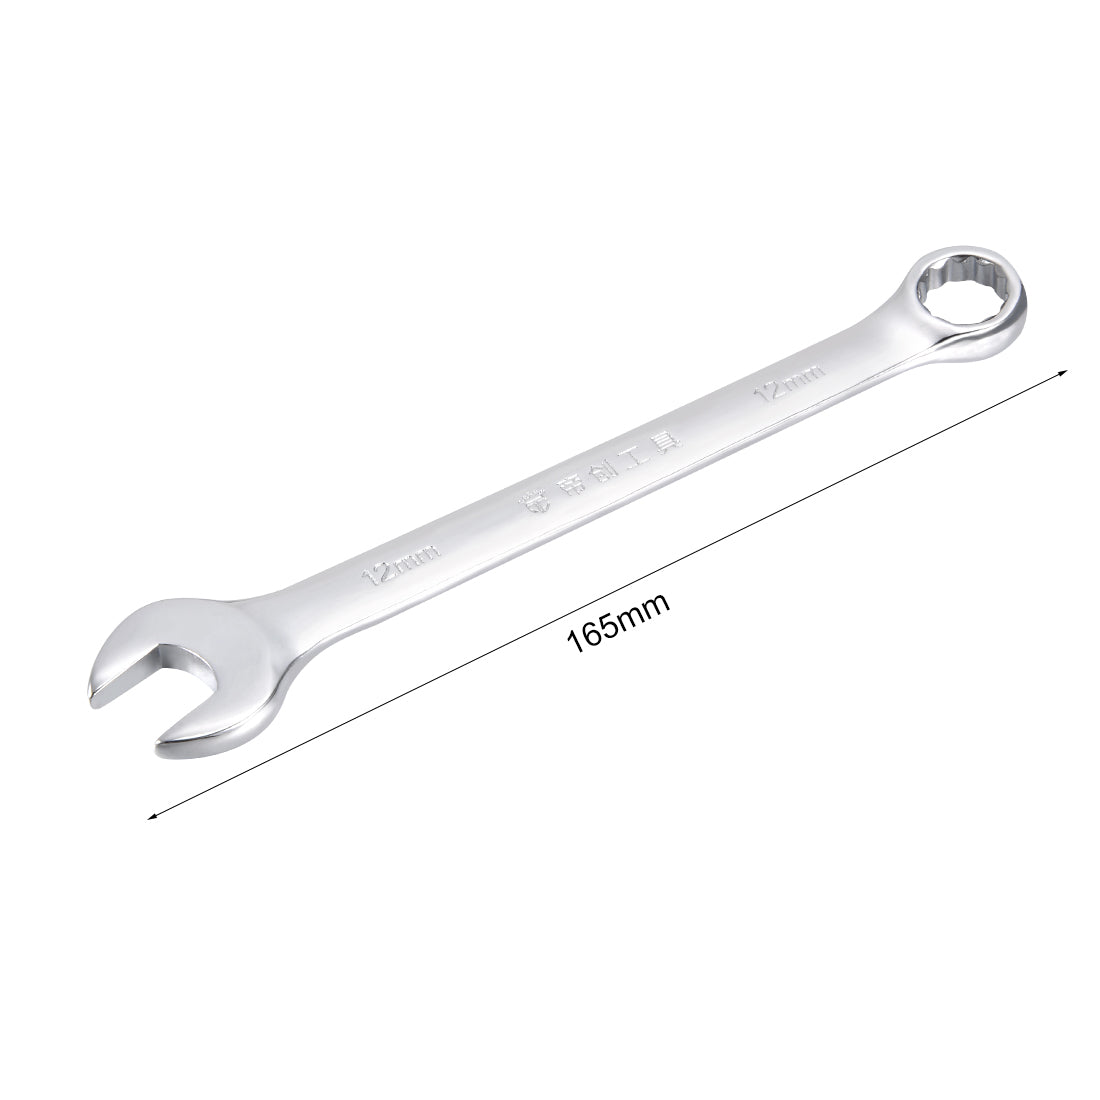 uxcell Uxcell Metric 12mm 12-Point Box Open End Combination Wrench Chrome Finish, Cr-V